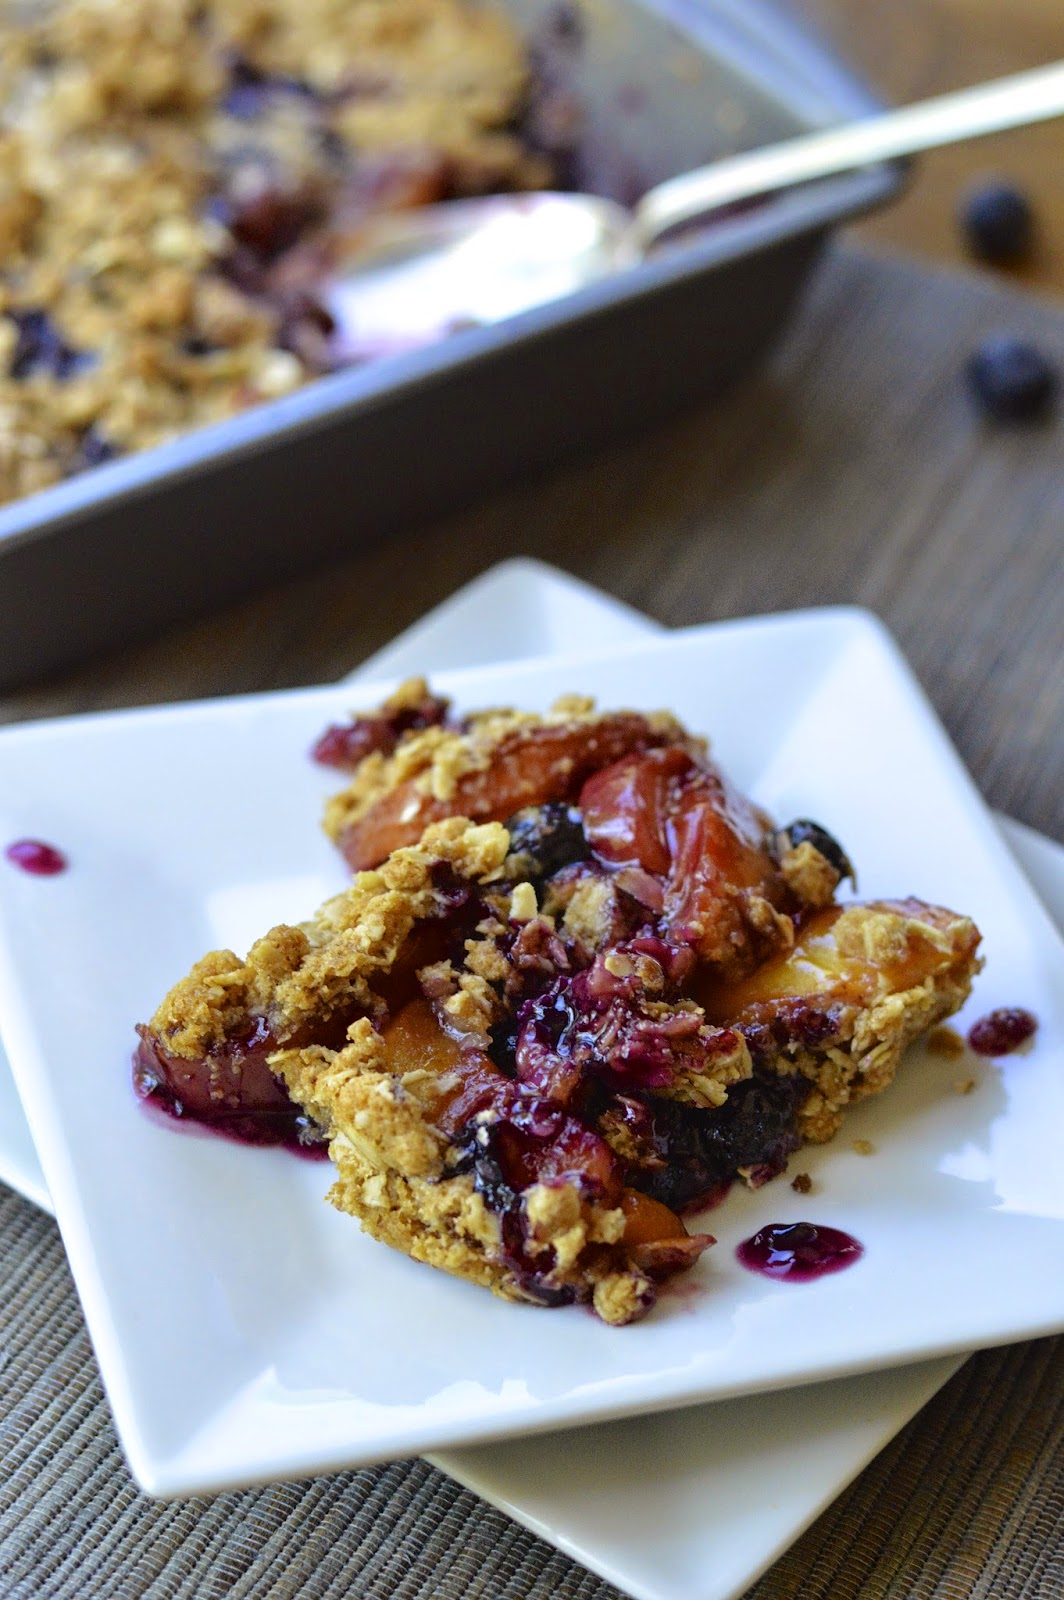 This beautiful summer blueberry and peach crisp is full of flavor, easy to make and gluten free.